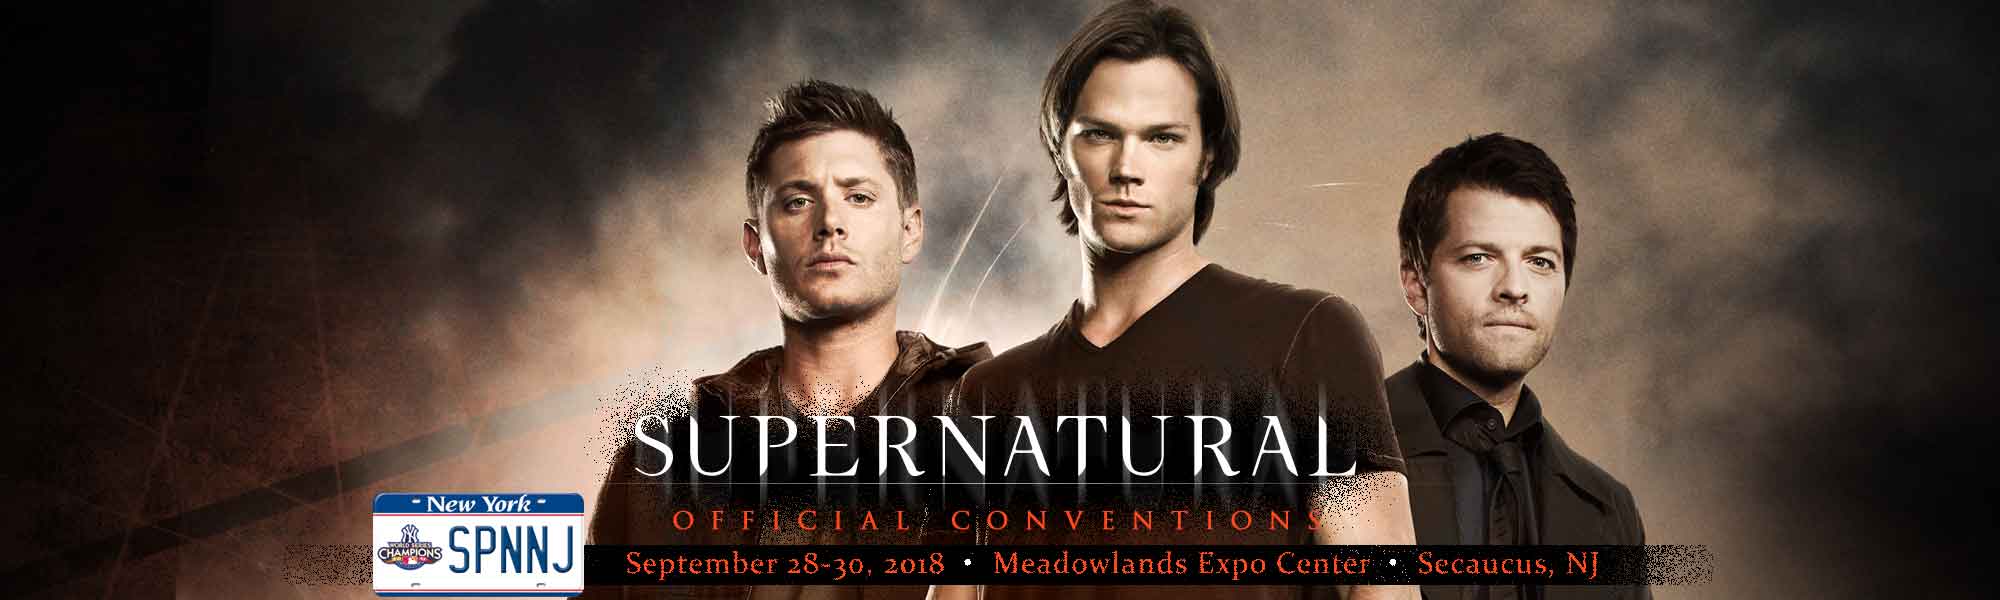 Creation Entertainment's Supernatural Offical Convention in Secaucus, NJ